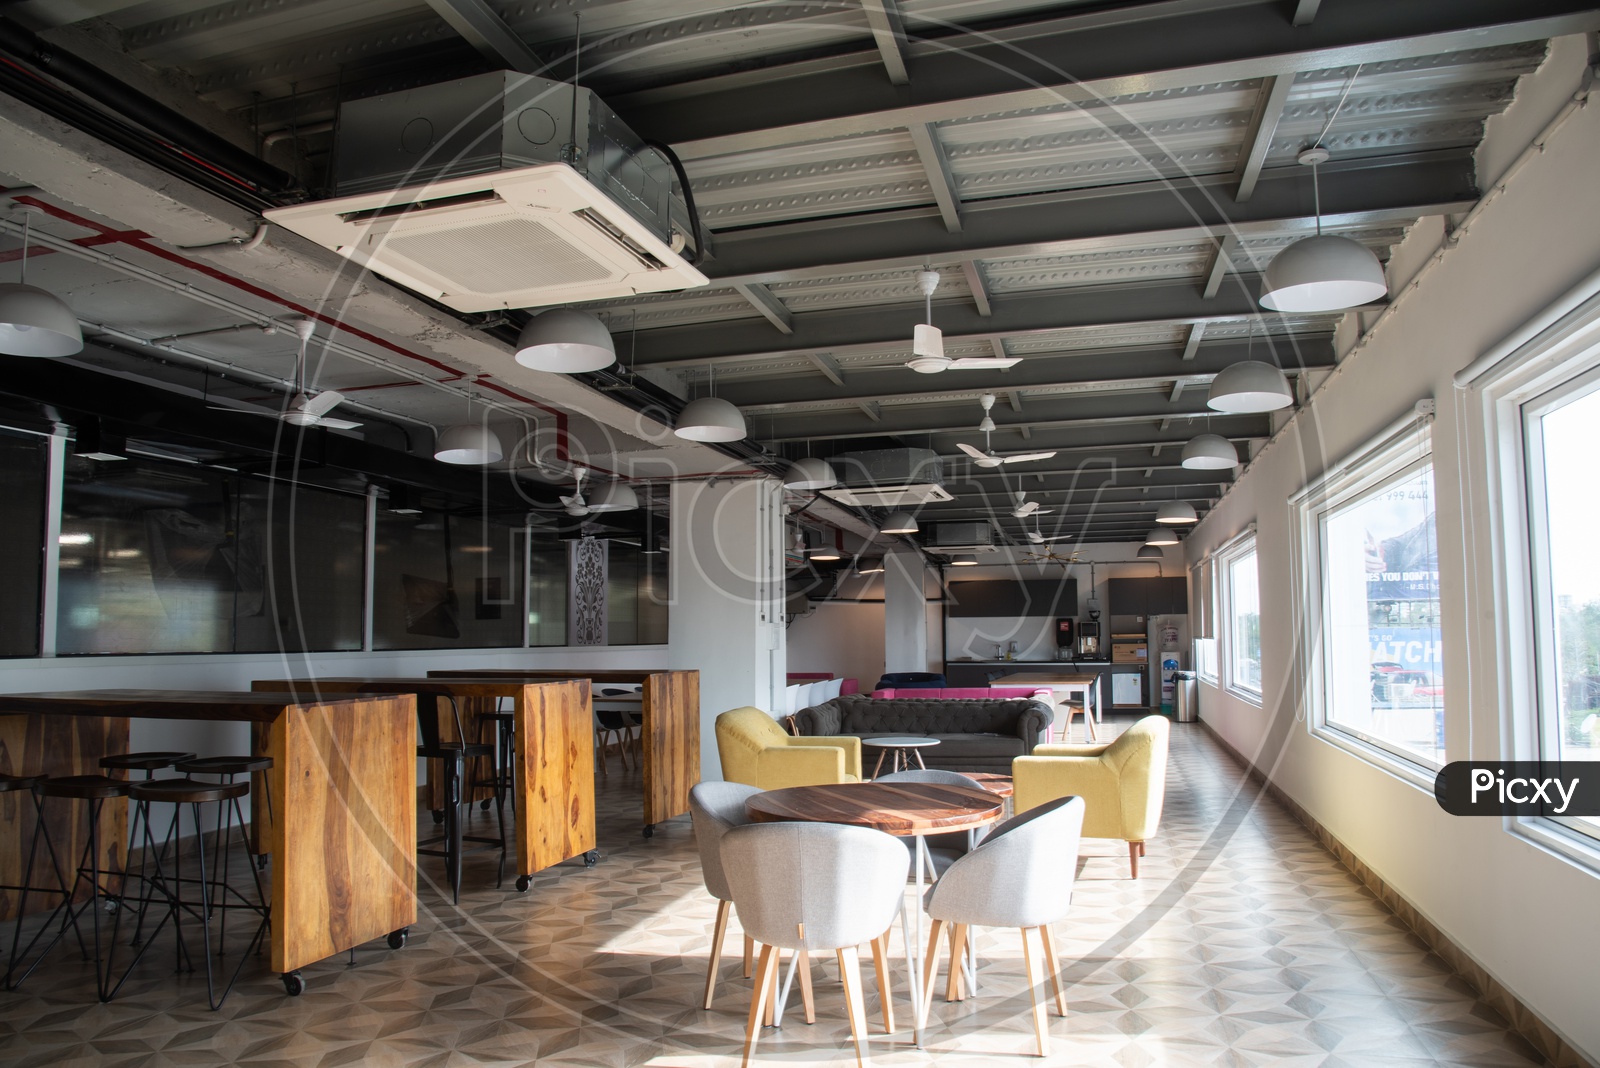 Coworking Spaces, Corporate Office Work Spaces, Recreation lounges